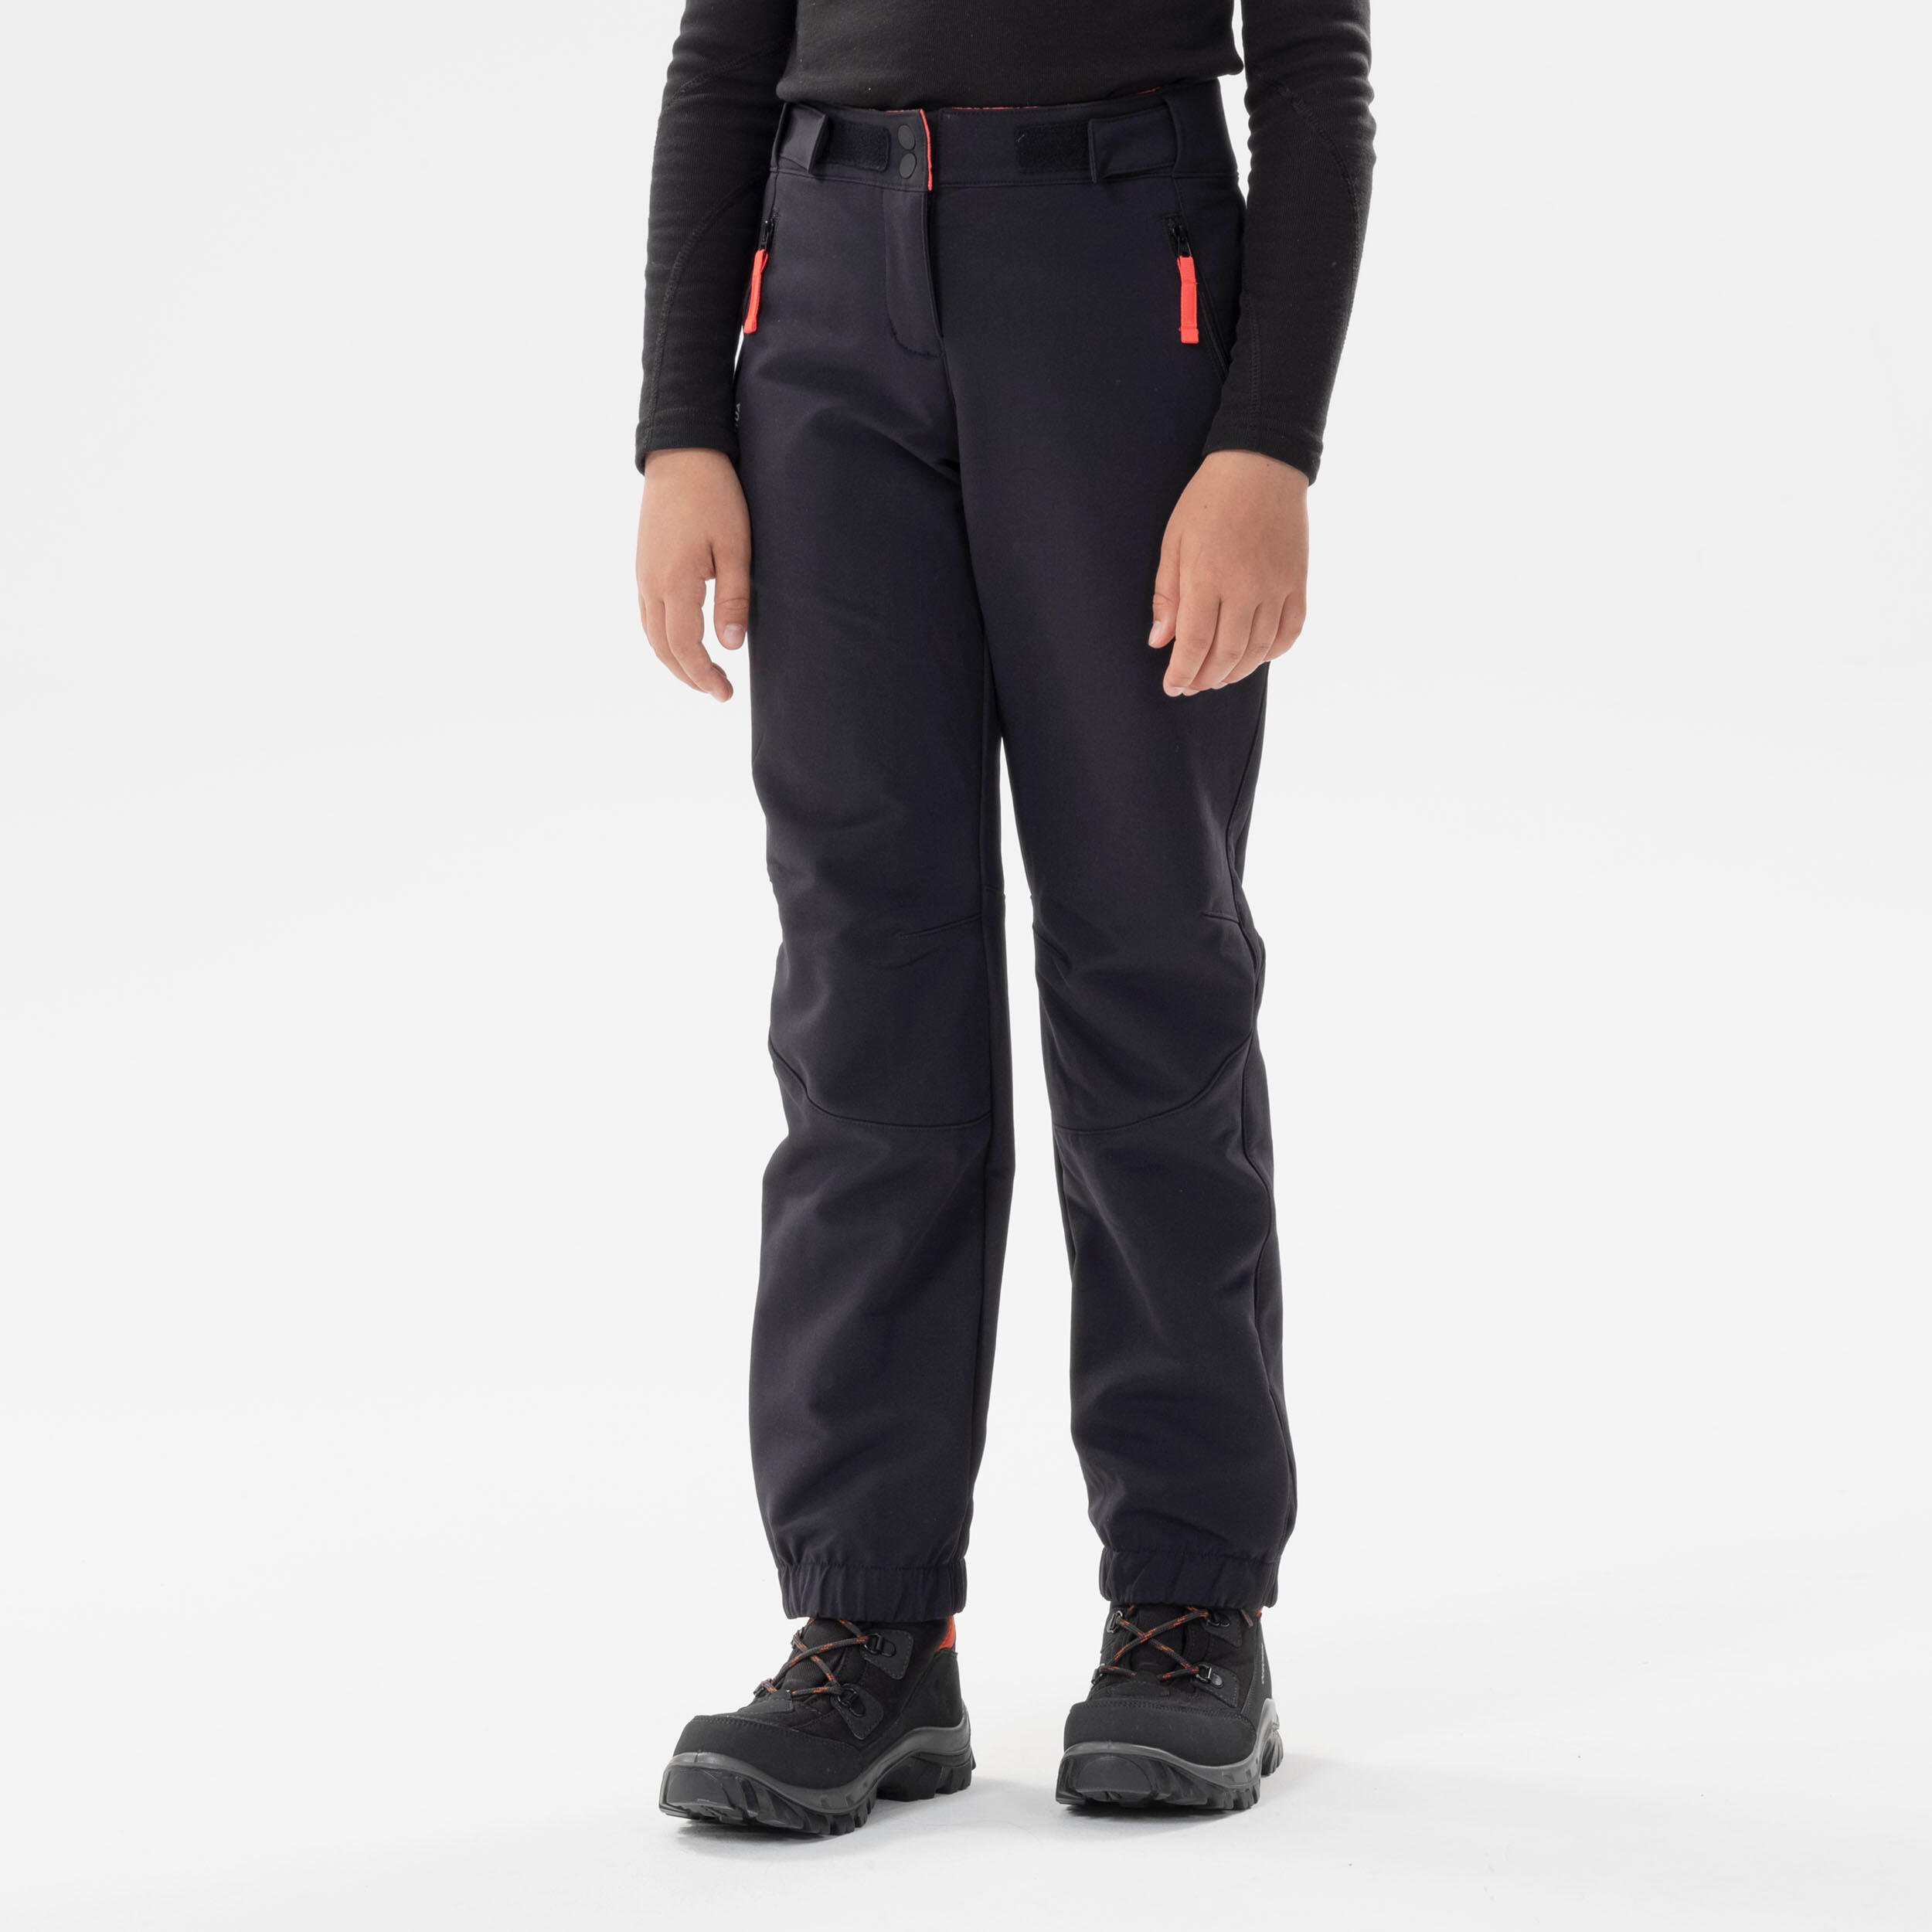 Kids’ Warm Hiking Softshell Trousers - SH500 Mountain - Ages 7-15 5/12